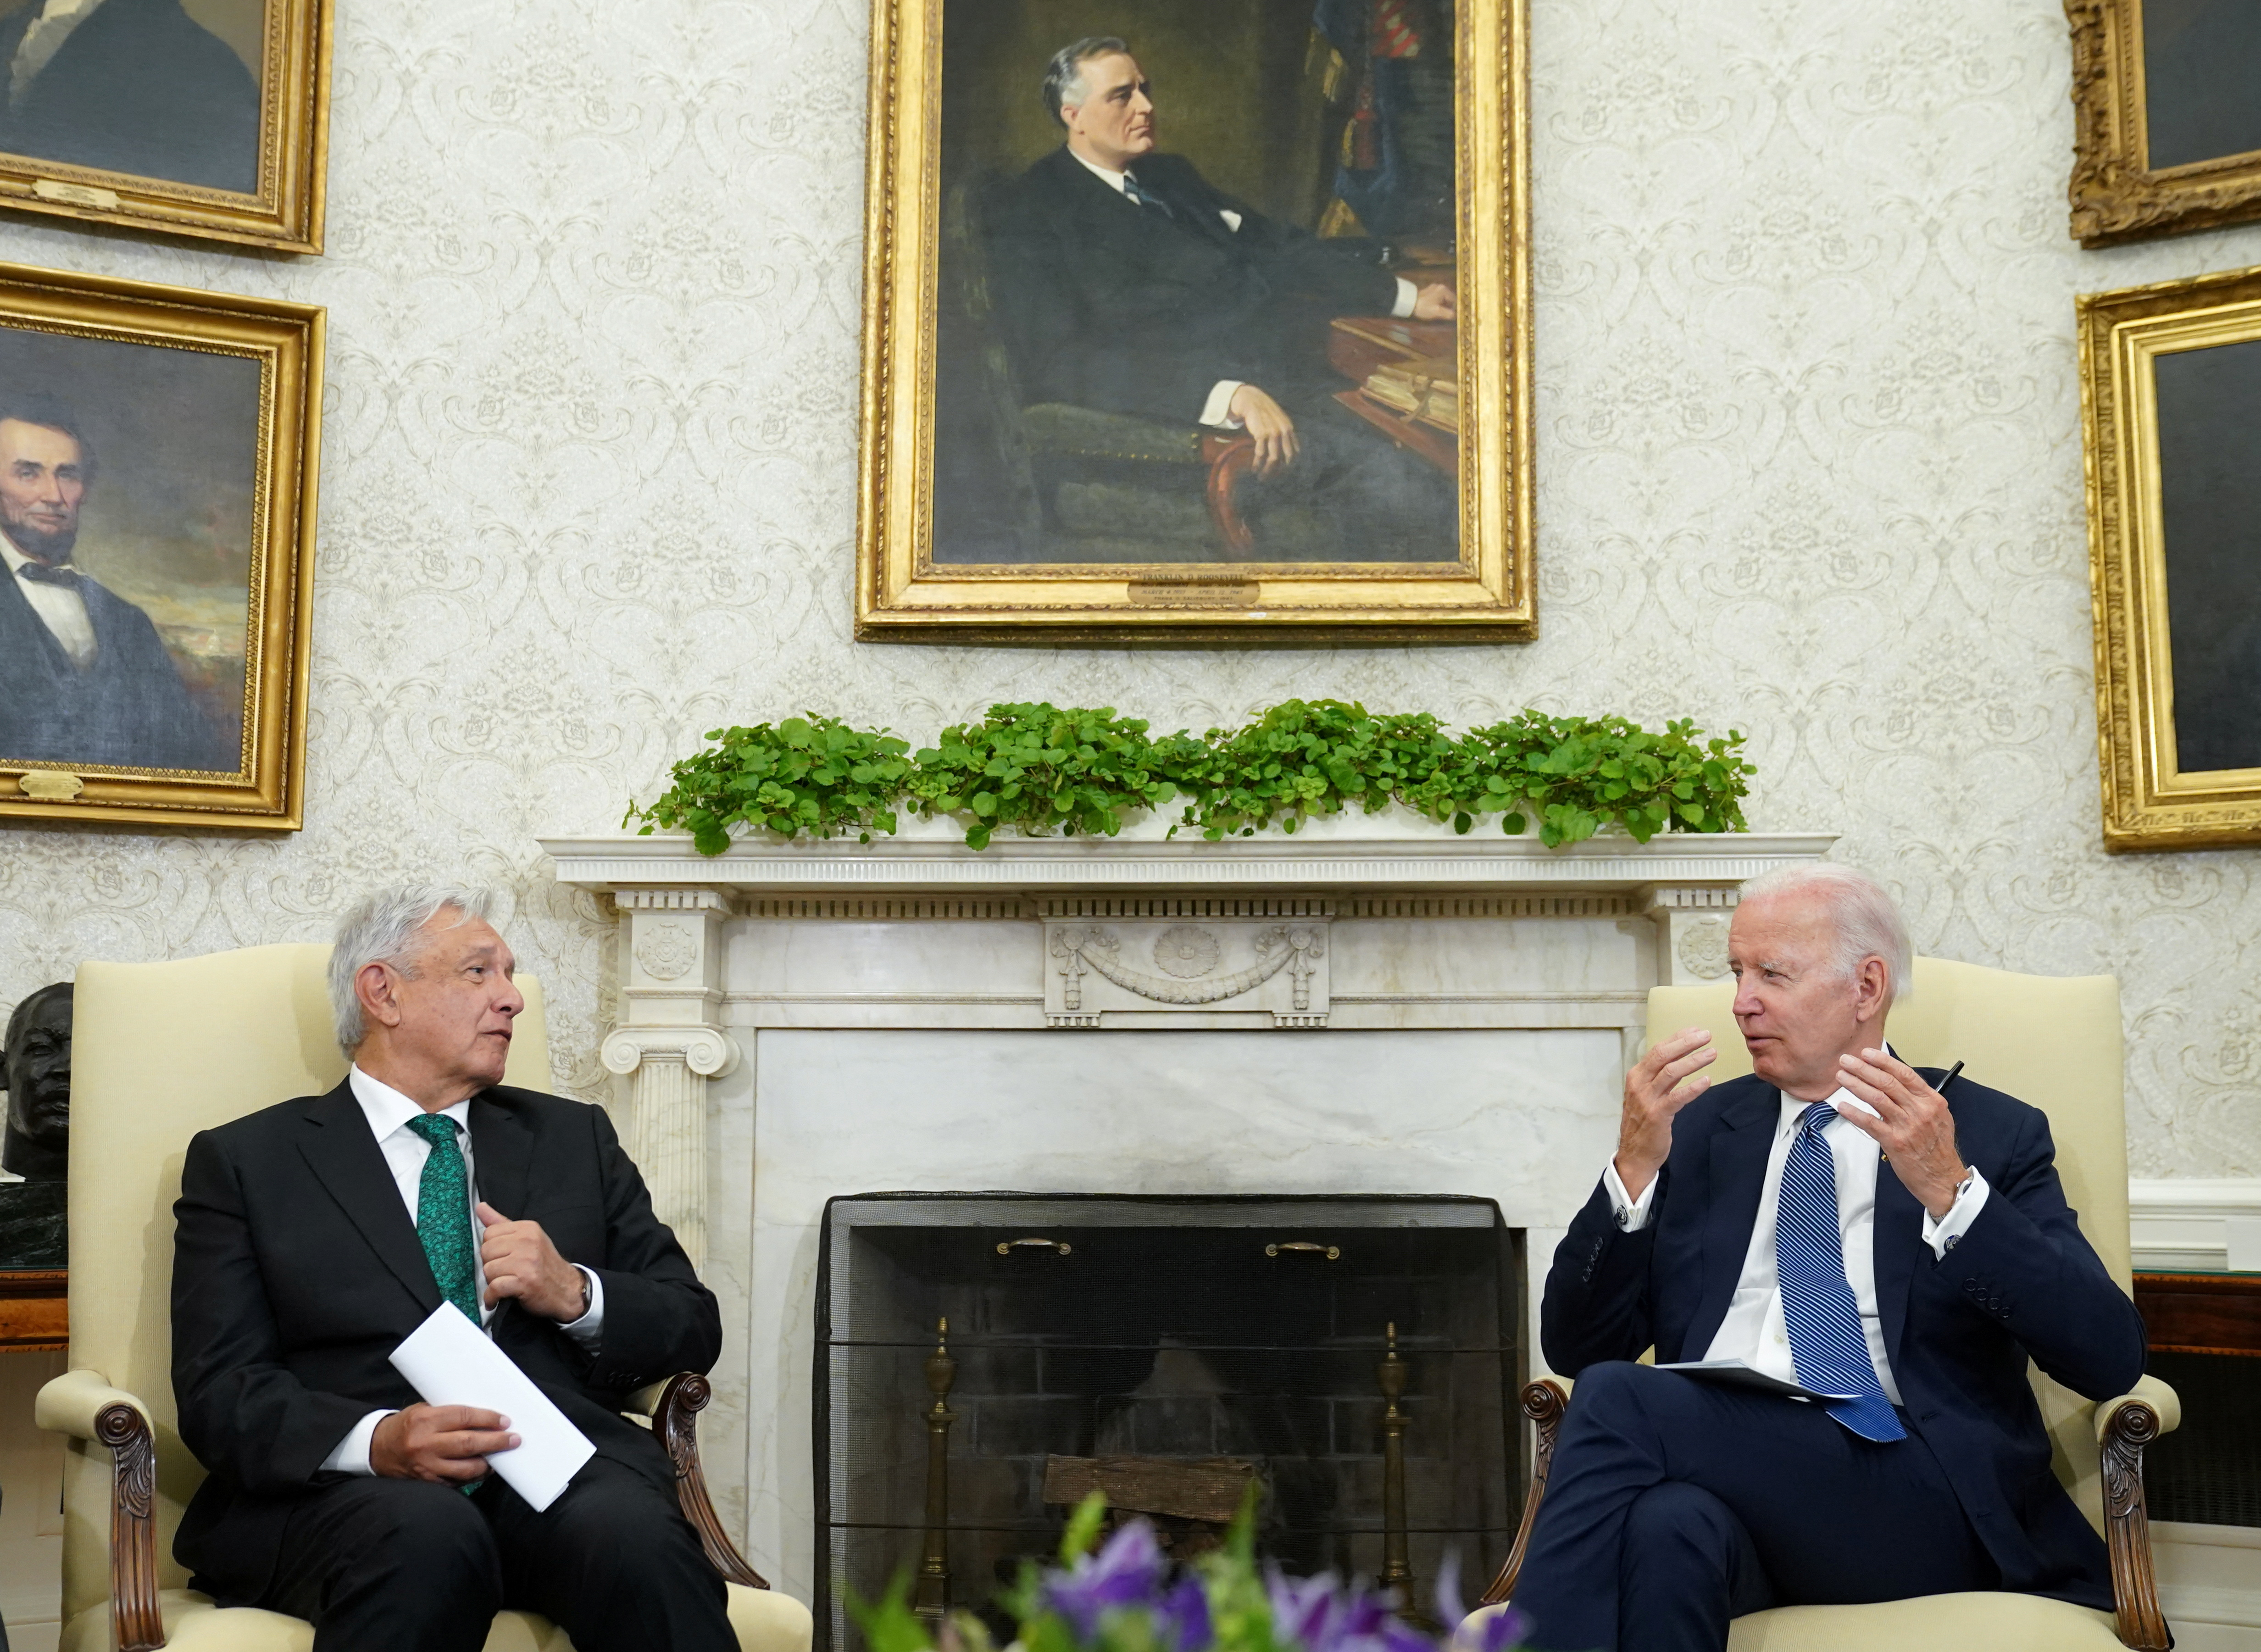 FILE PHOTO - U.S. President Biden meets with Mexican President Andres Manuel Lopez Obrador at the White House in Washington